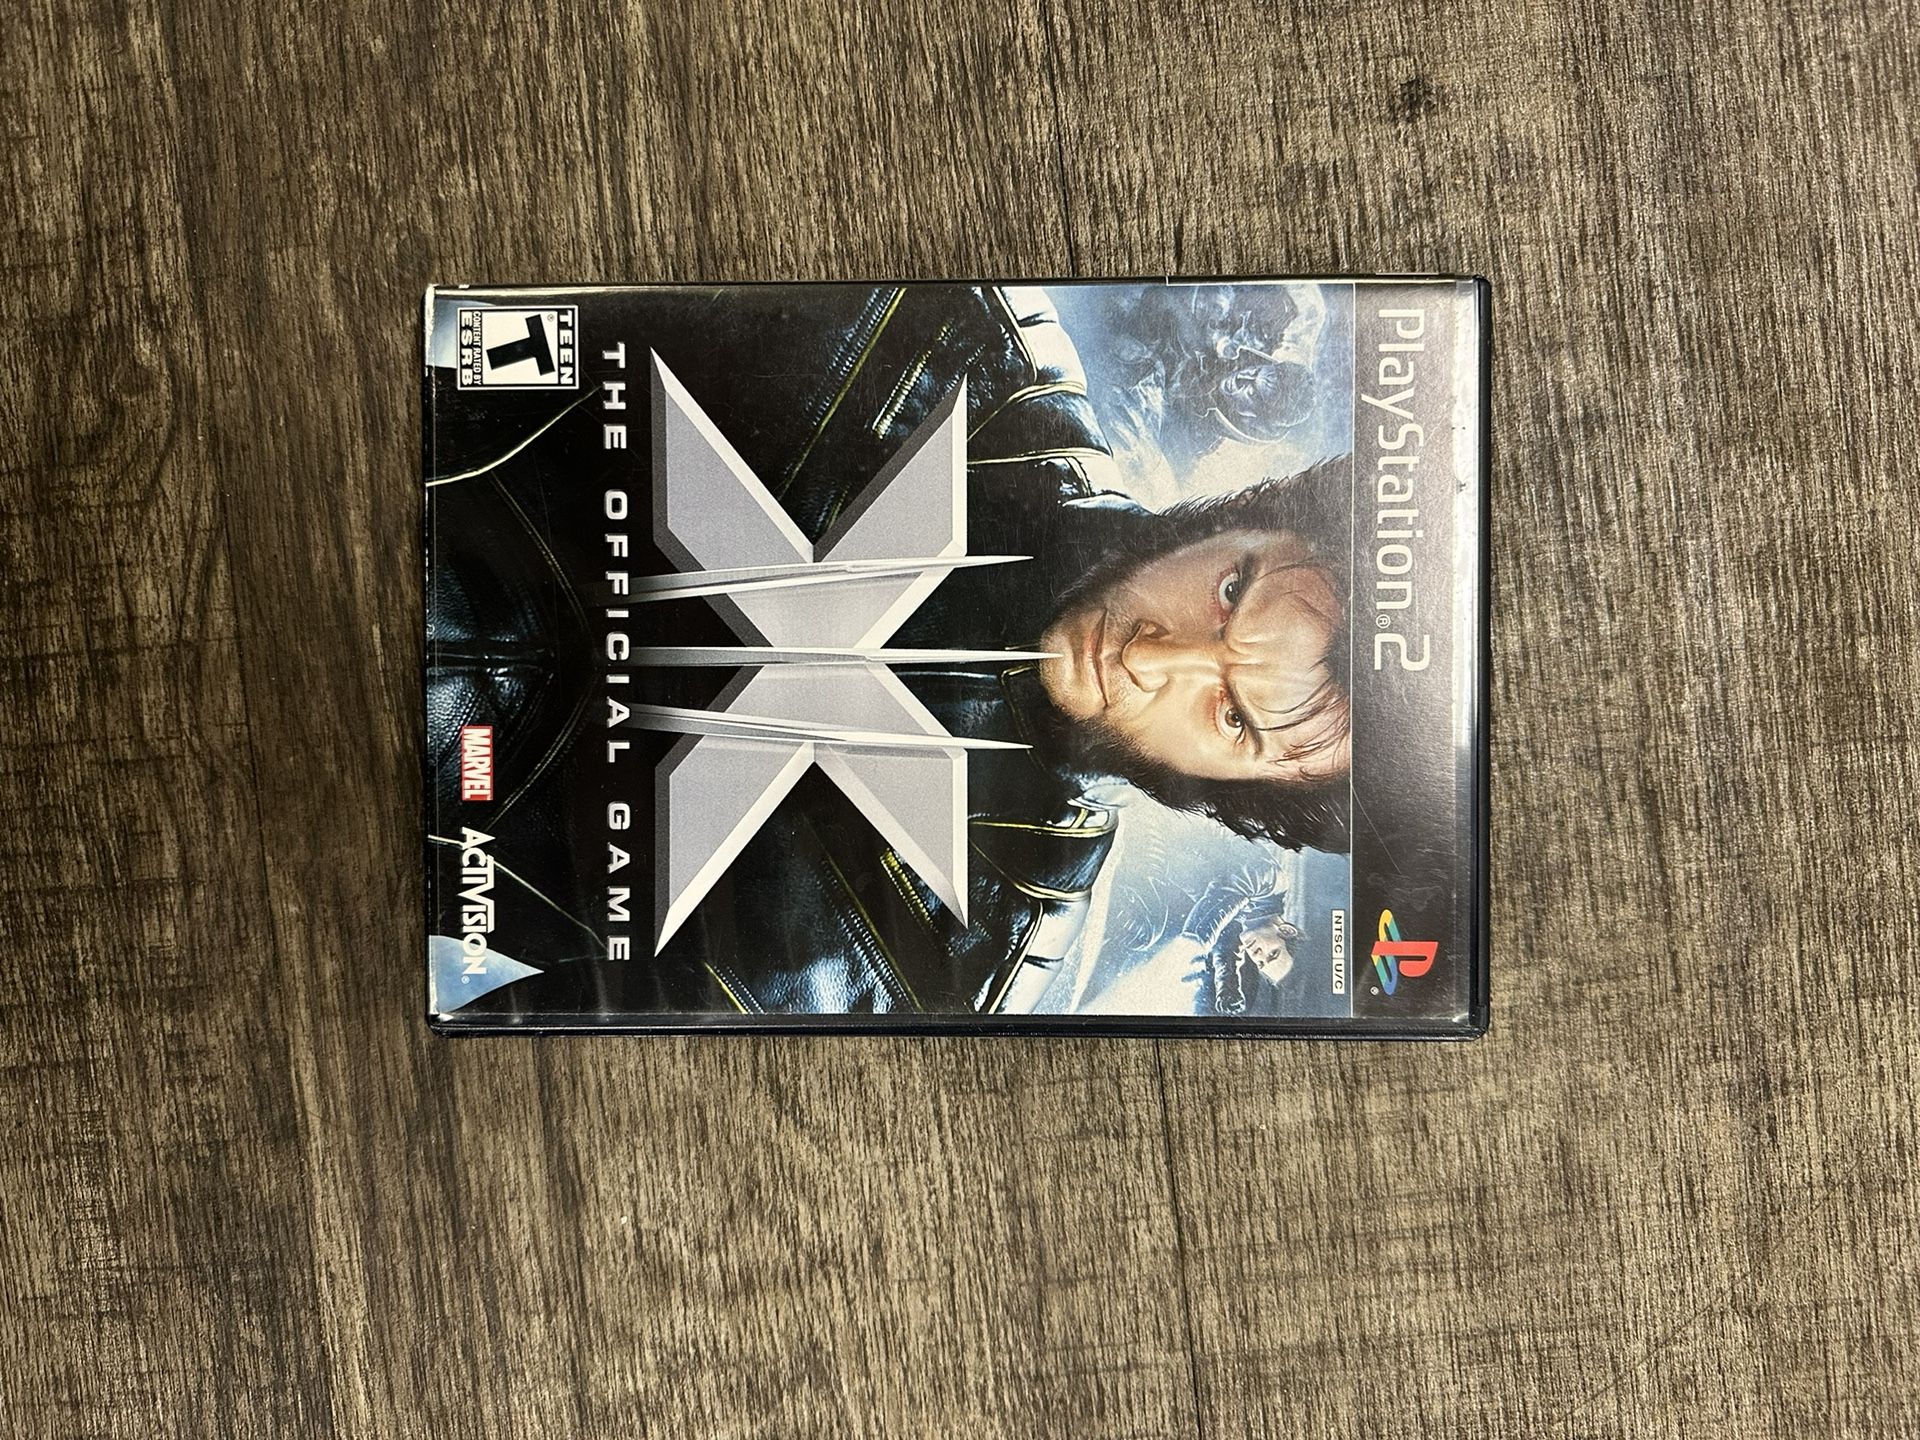 X-Men: The Official Game ( PlayStation 2 2006) PS2 Complete w/Manual. Preowned